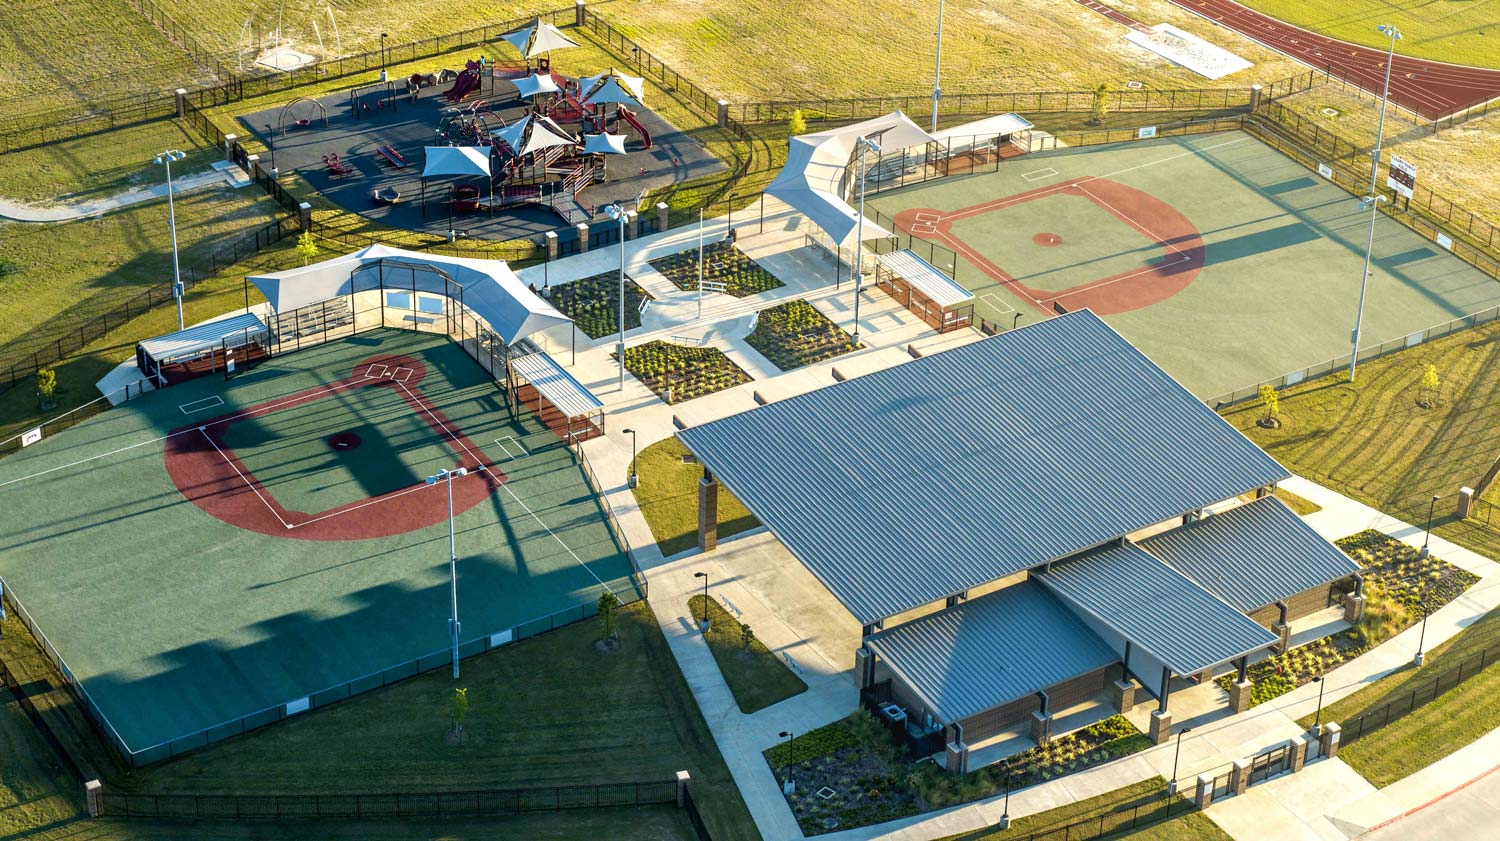 Overview of the Insperity Adaptive Sports Complex